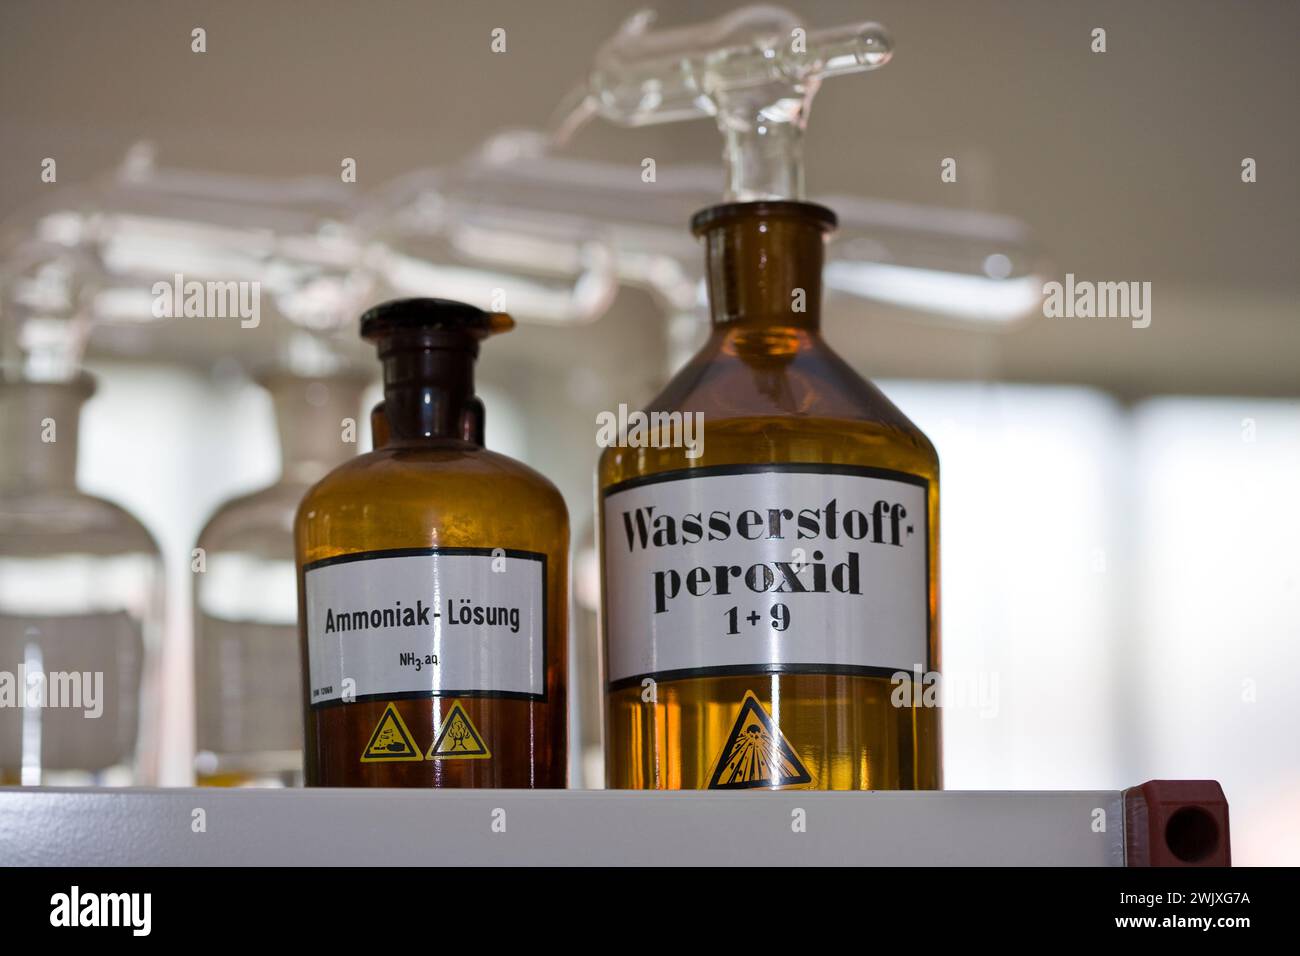 Hydrogen peroxide  and Ammonia, old chemical laboratory, Germany, Europe Stock Photo